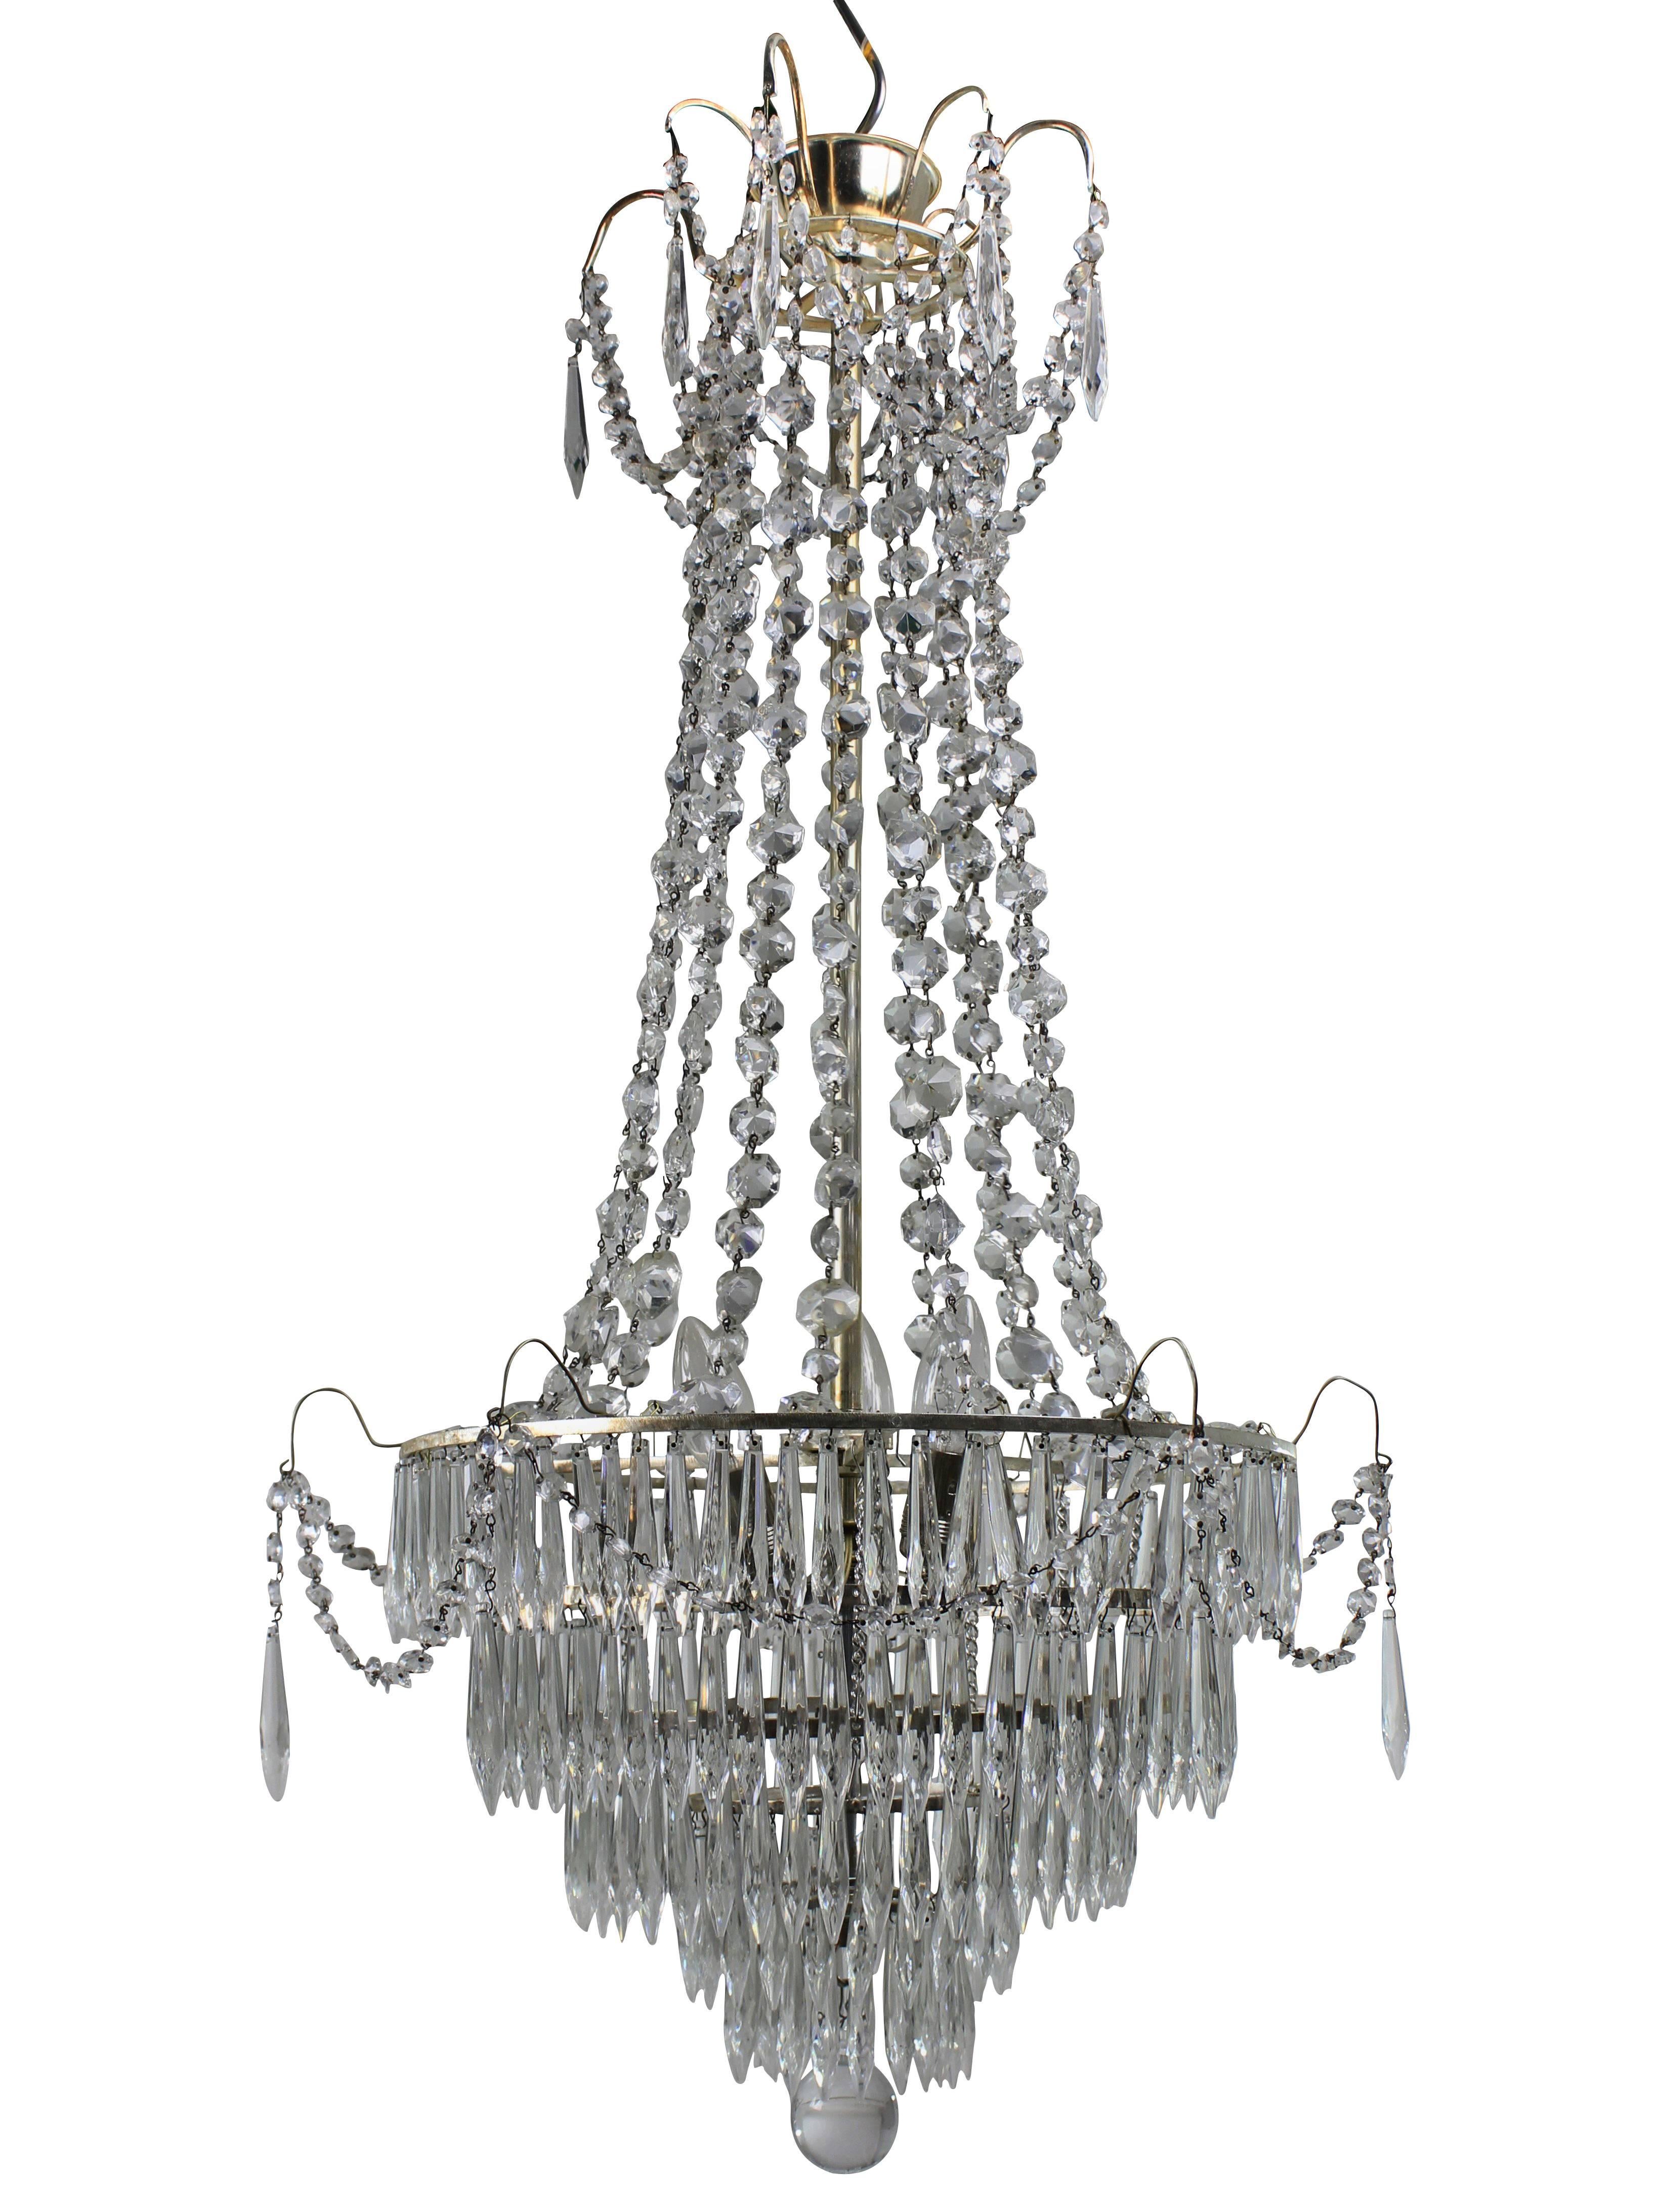 A pair of Swedish chandeliers of simple design in silver plate and hung delicately throughout with cut-glass.